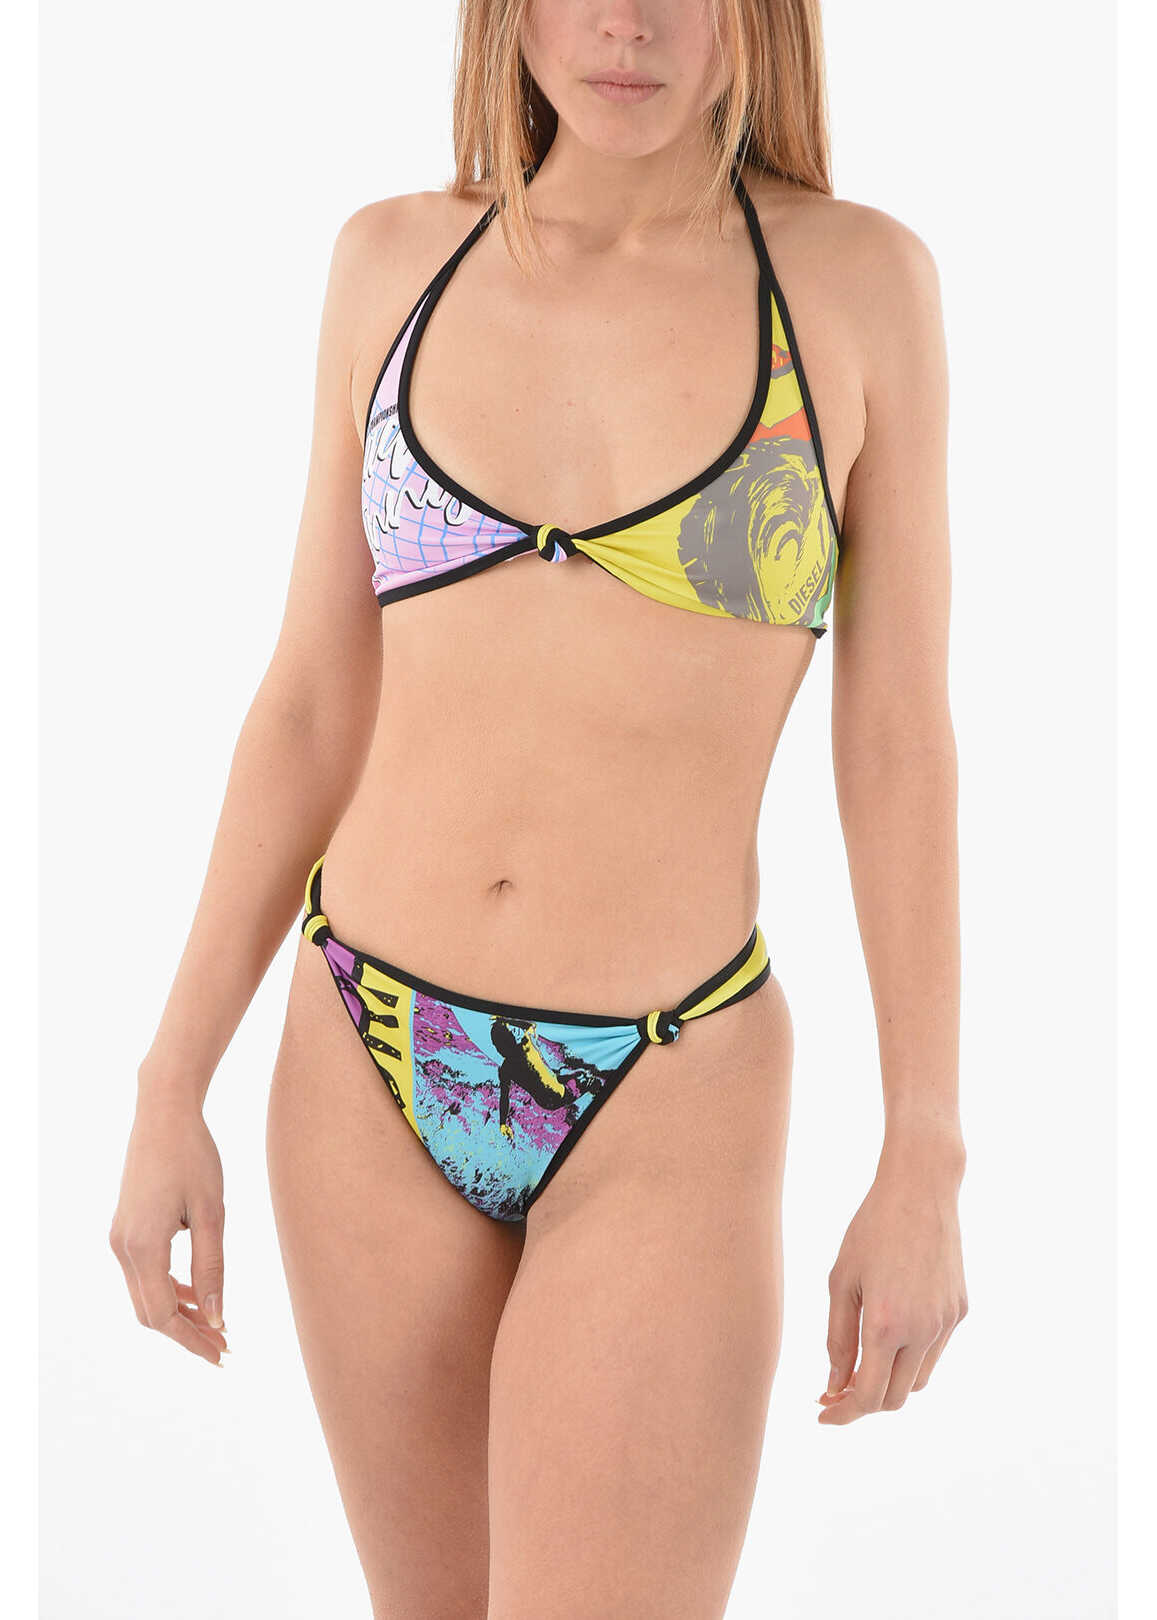 Diesel Patterned Bfbk-Oly-Emy Bikini With Knotted Design Multicolor